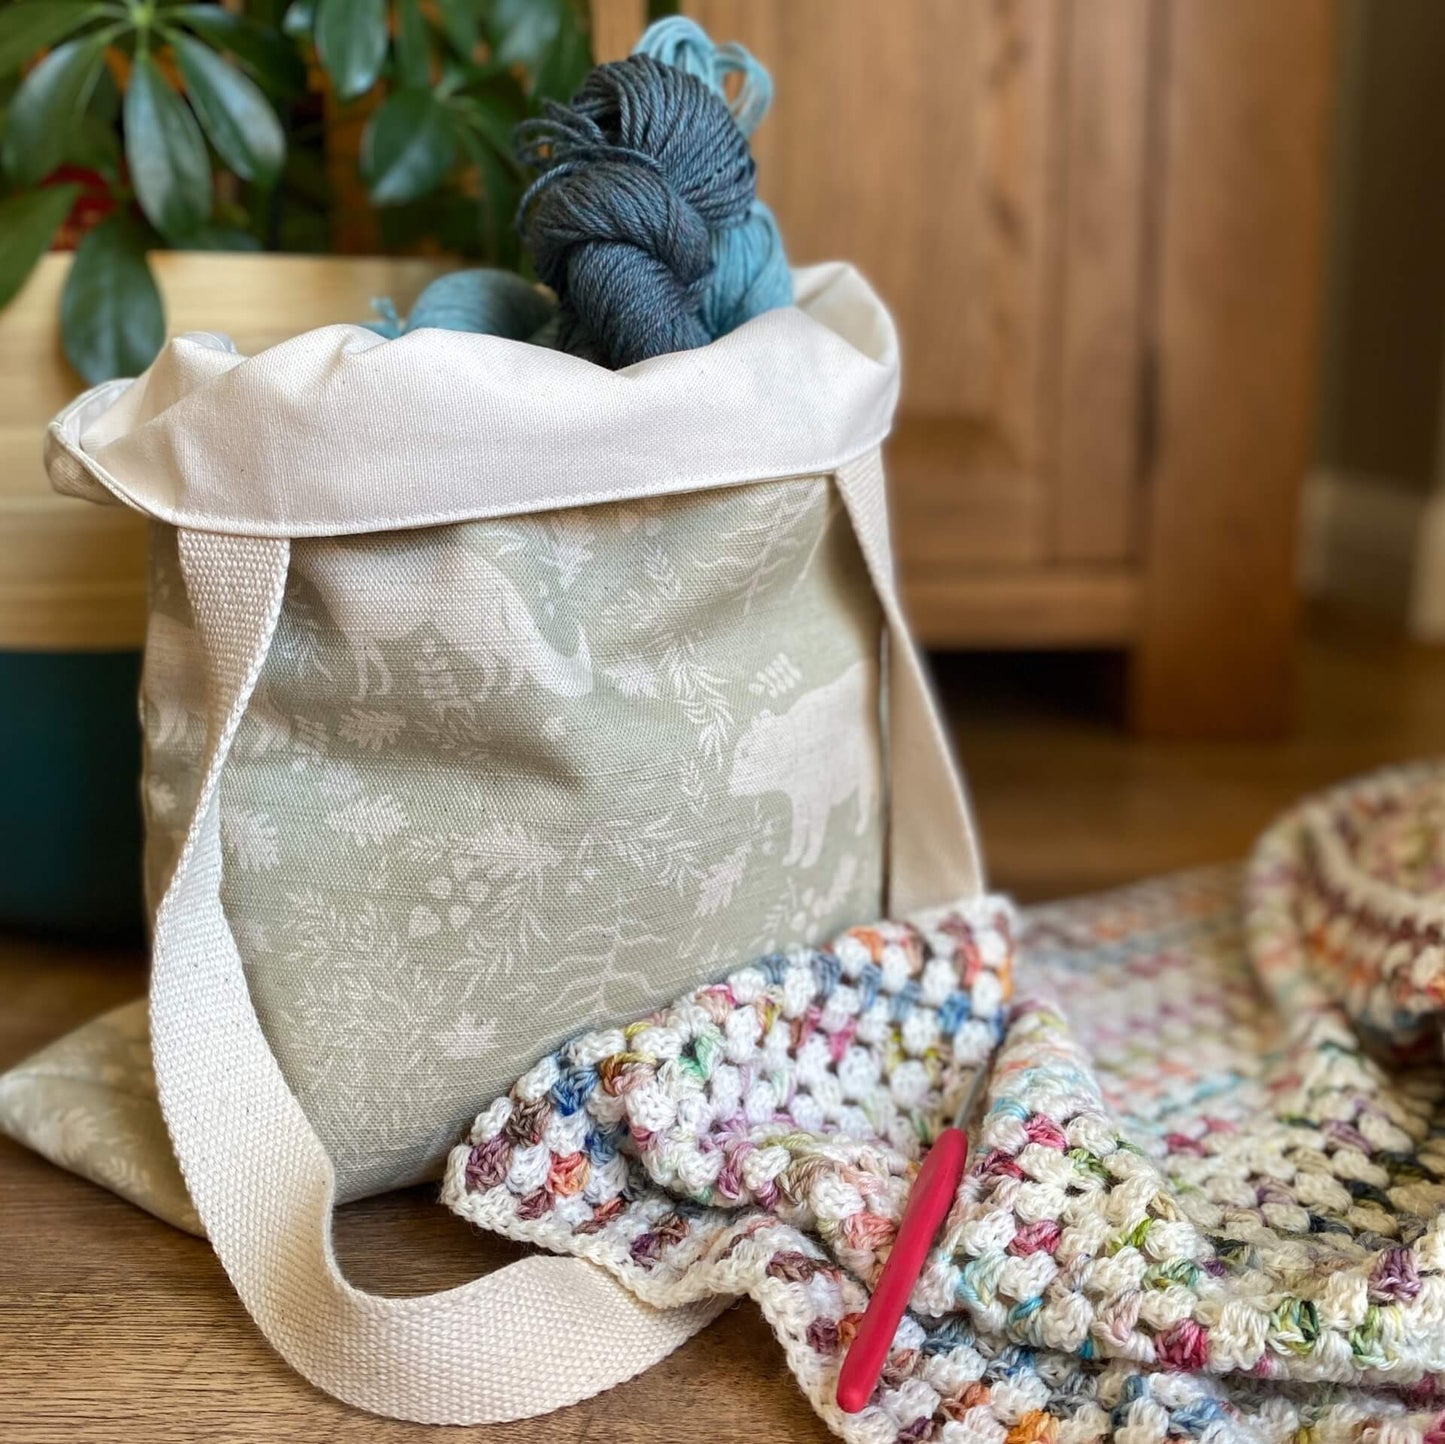 A tote bag holding yarn sits on the floor next to a crochet blanket and a houseplant. The bag is made from a sage coloured fabric that is printed with woodland images. A crochet hook is sitting on the crochet blanket. 